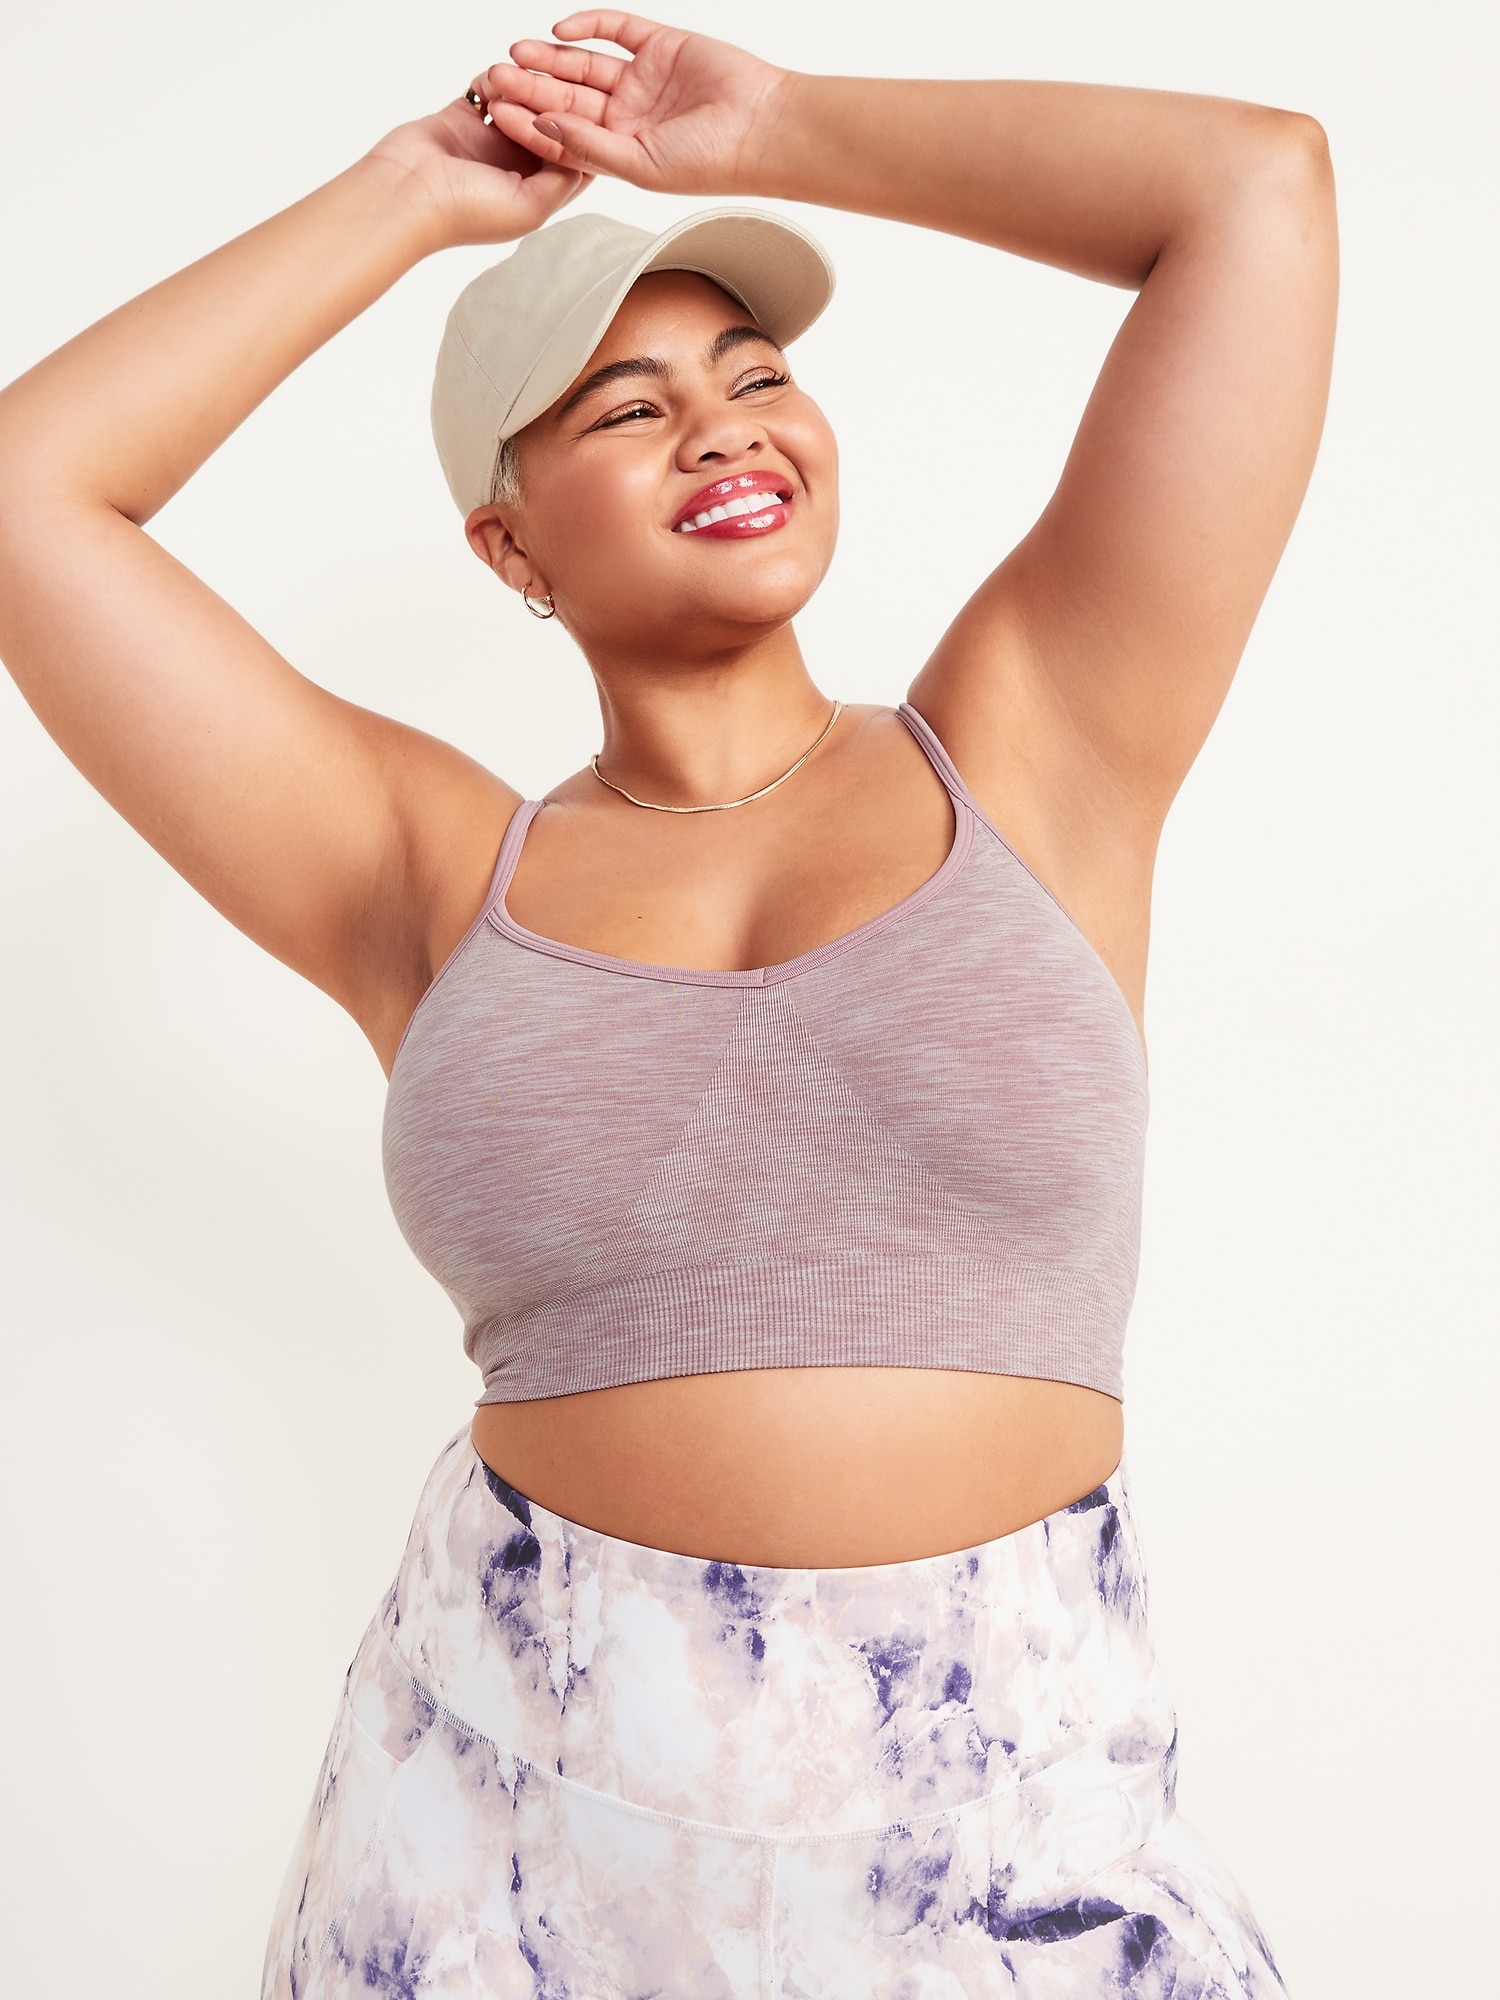 8 Supportive and Stylish Sports Bras from A cups to DDs